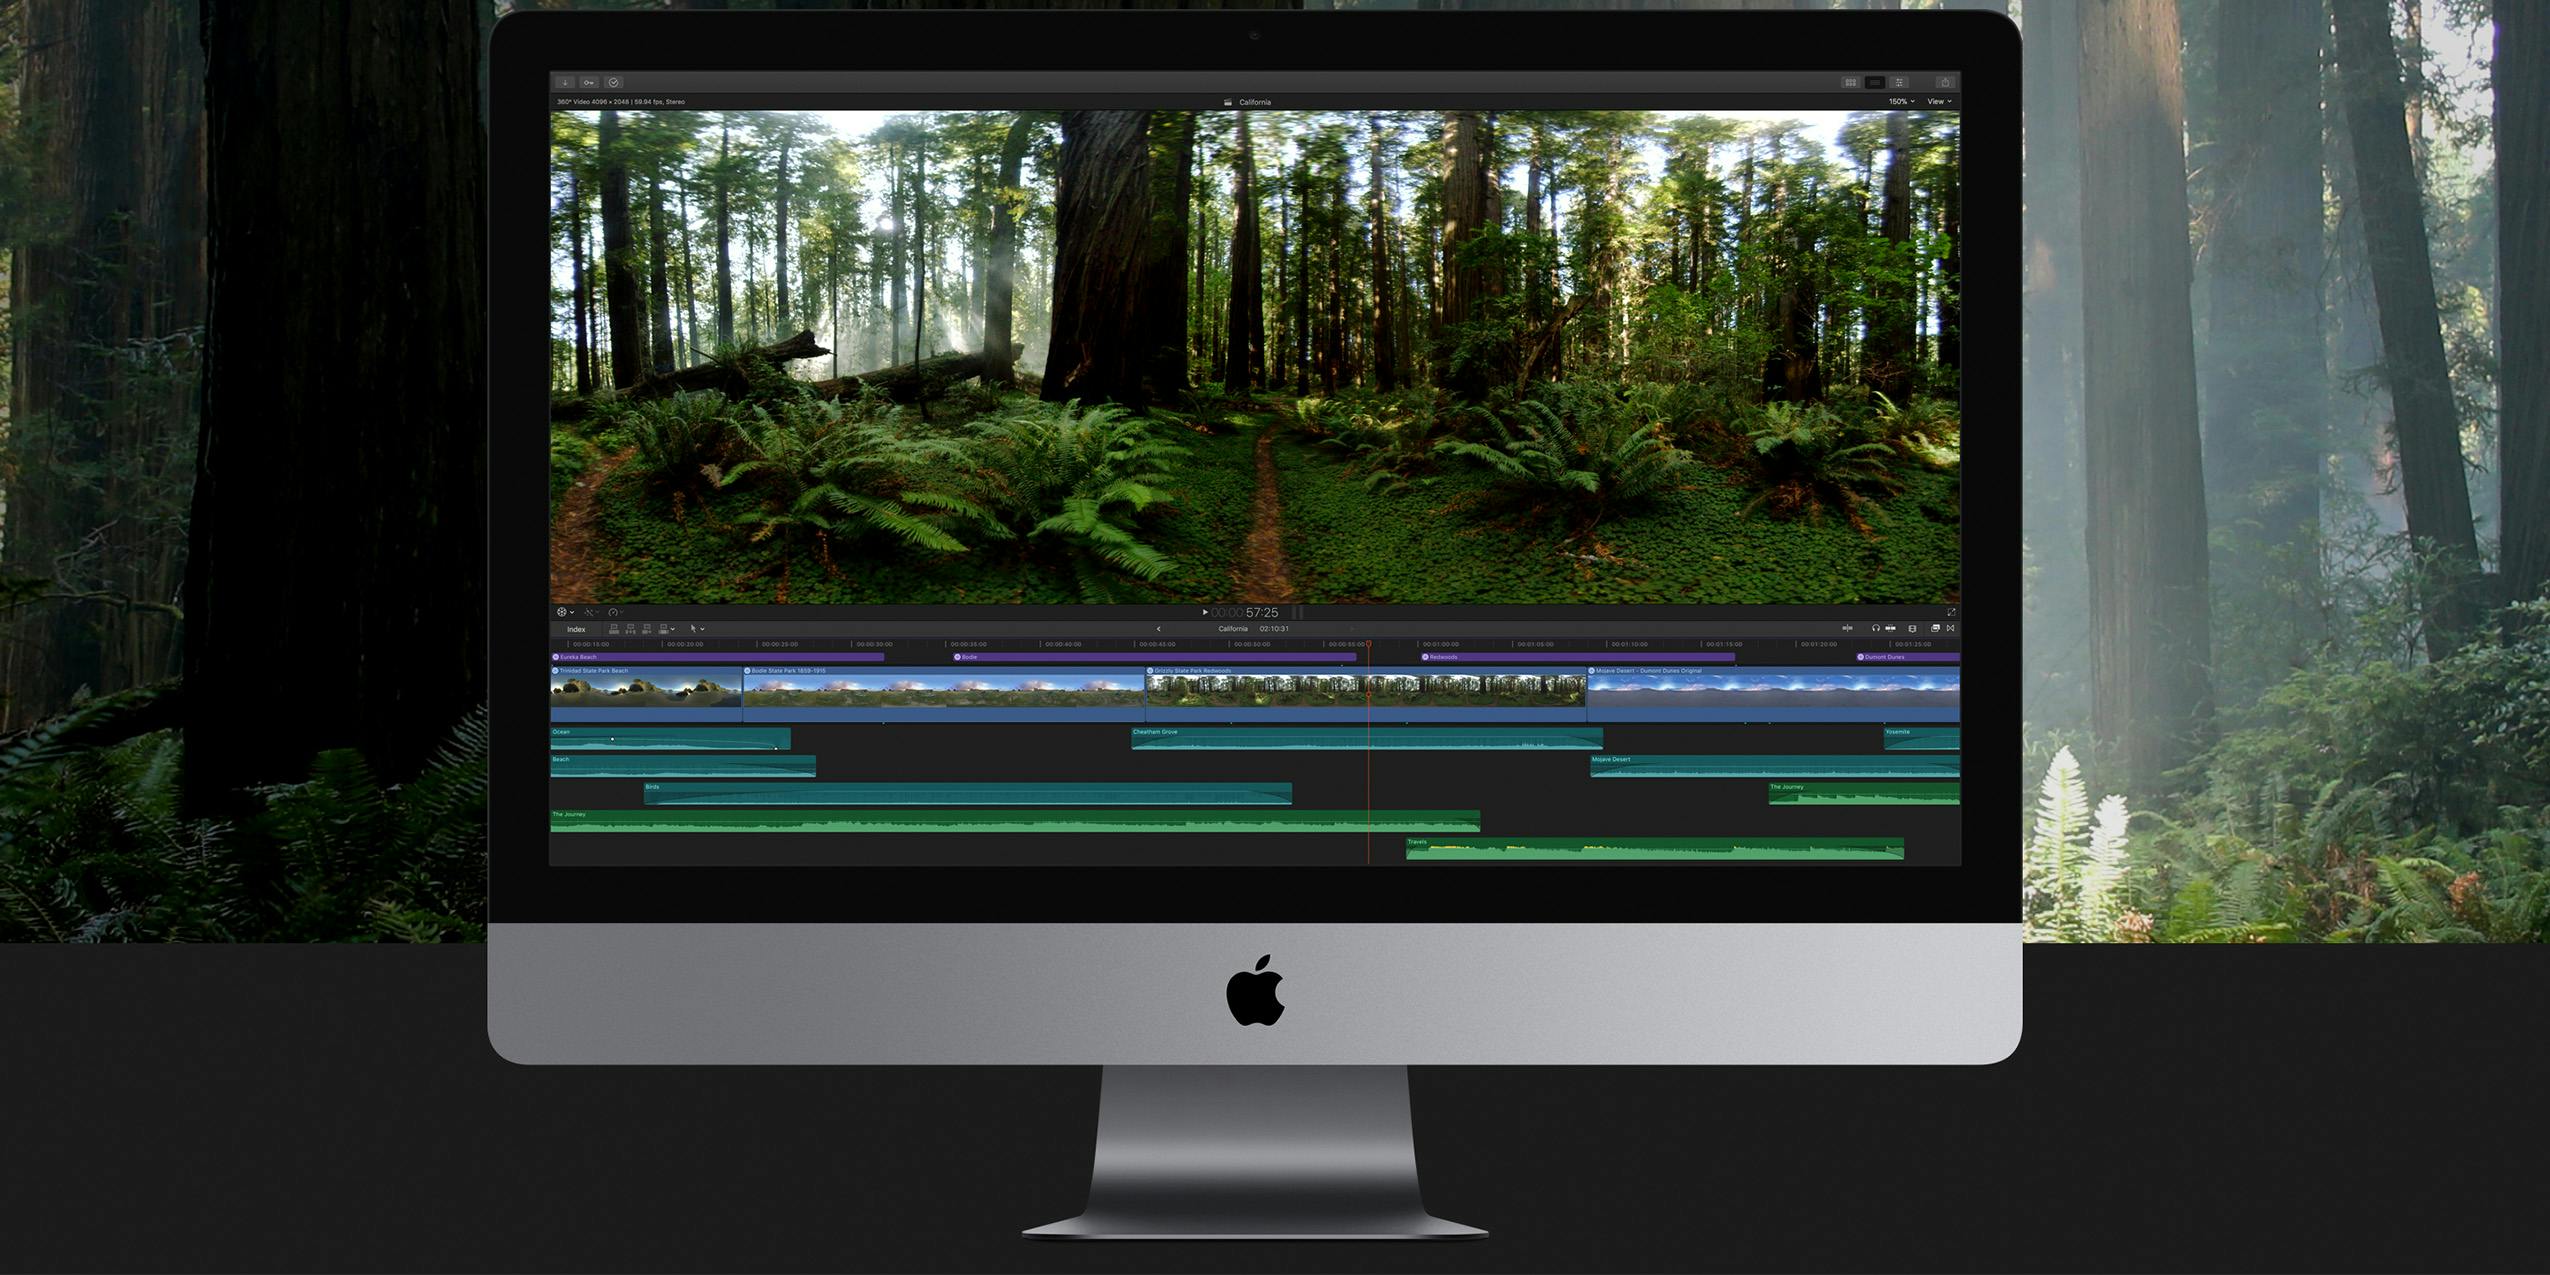 Final Cut Pro being used to edit nature videos and audio.